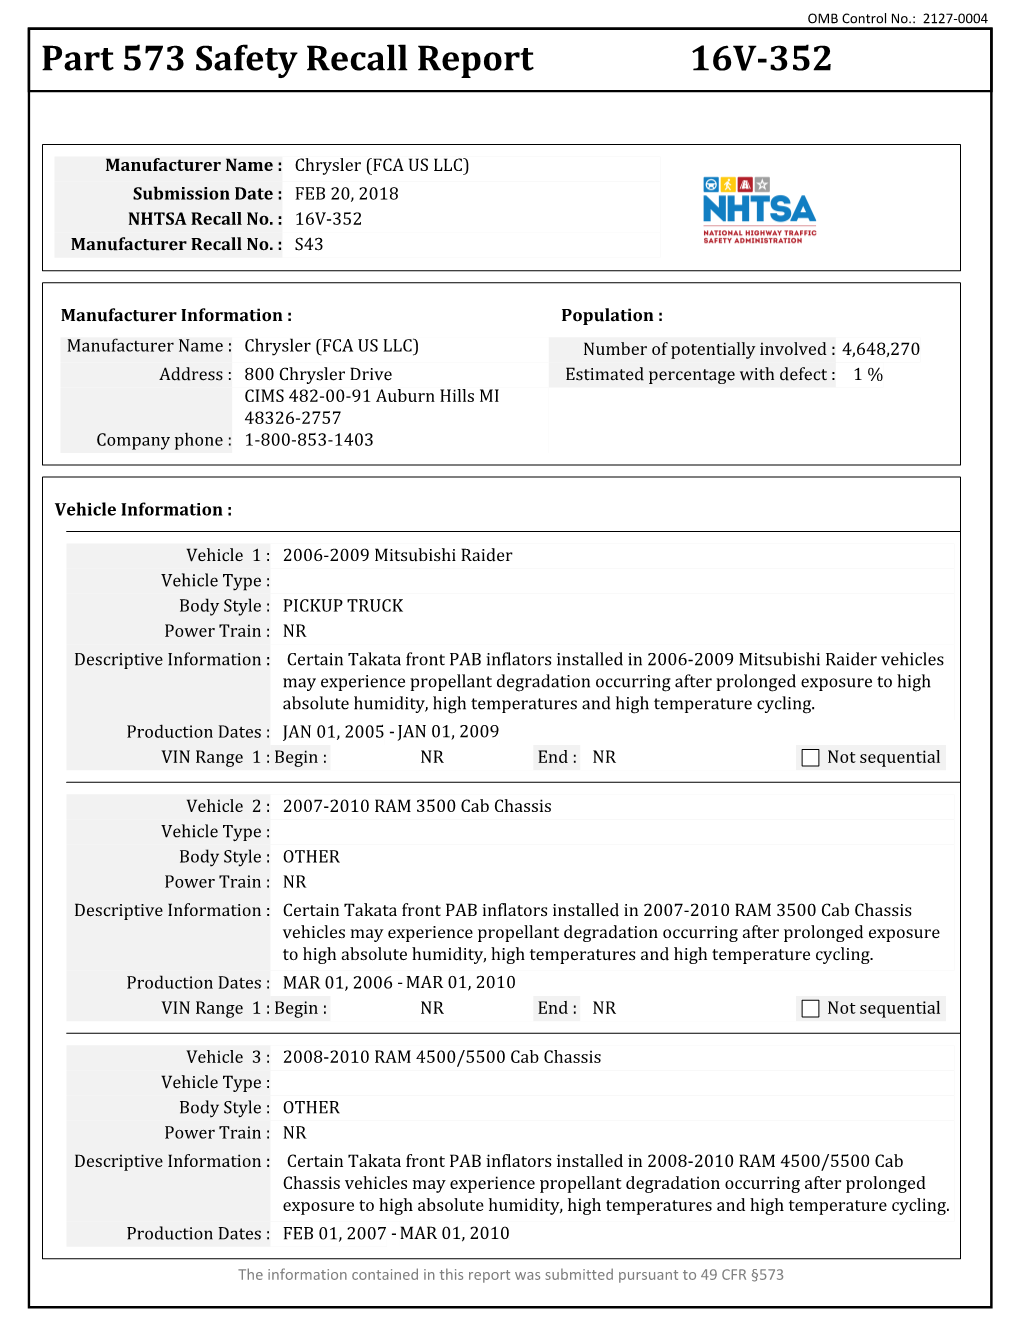 Part 573 Safety Recall Report 16V-352